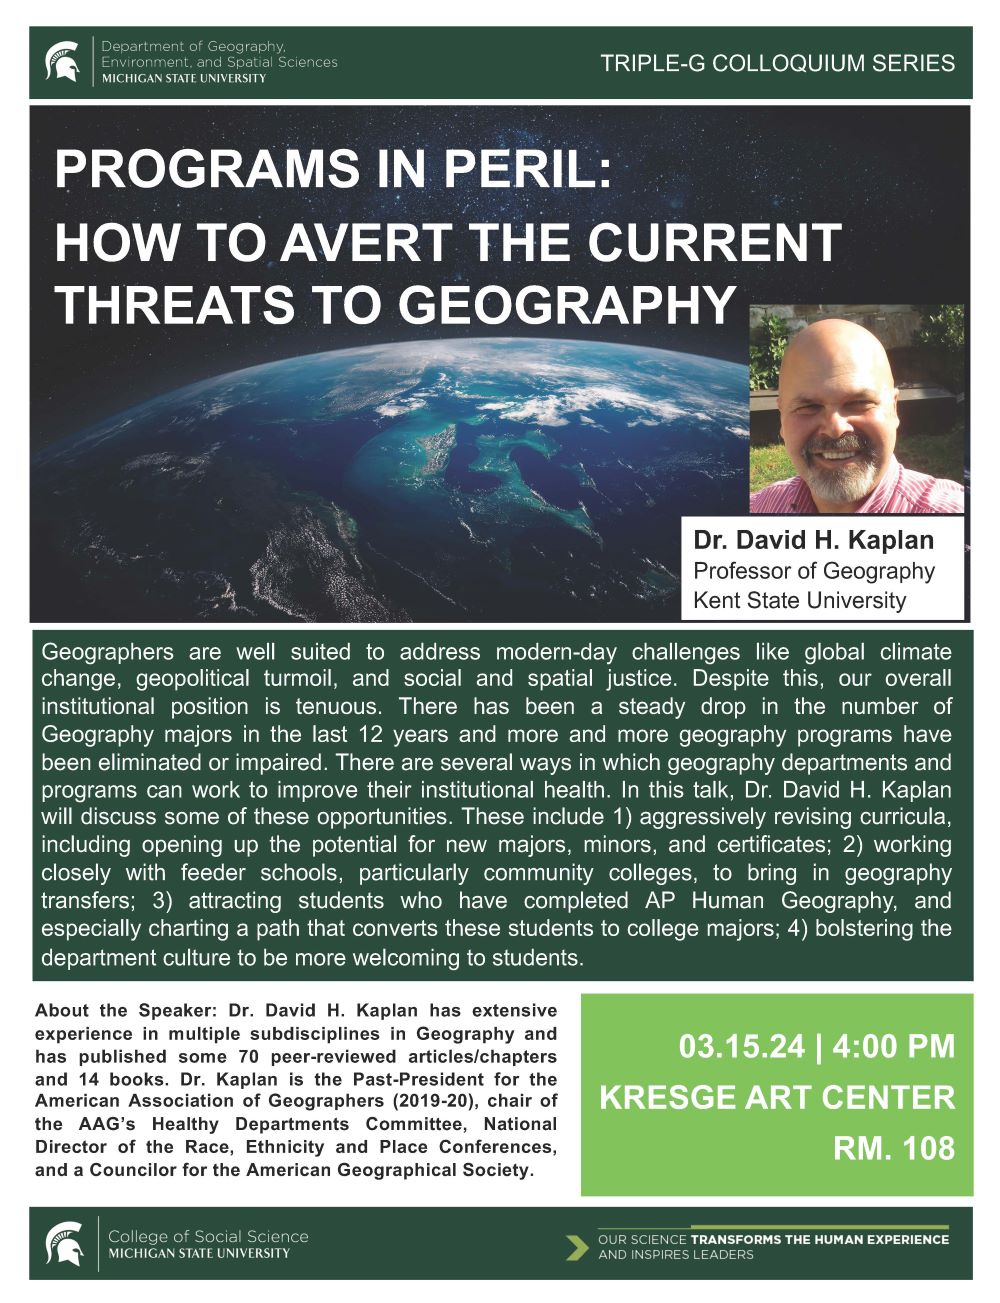 Flyer for David Kaplan's discussion entitled Programs in Peril: How to Avert the Current Threats to Geography